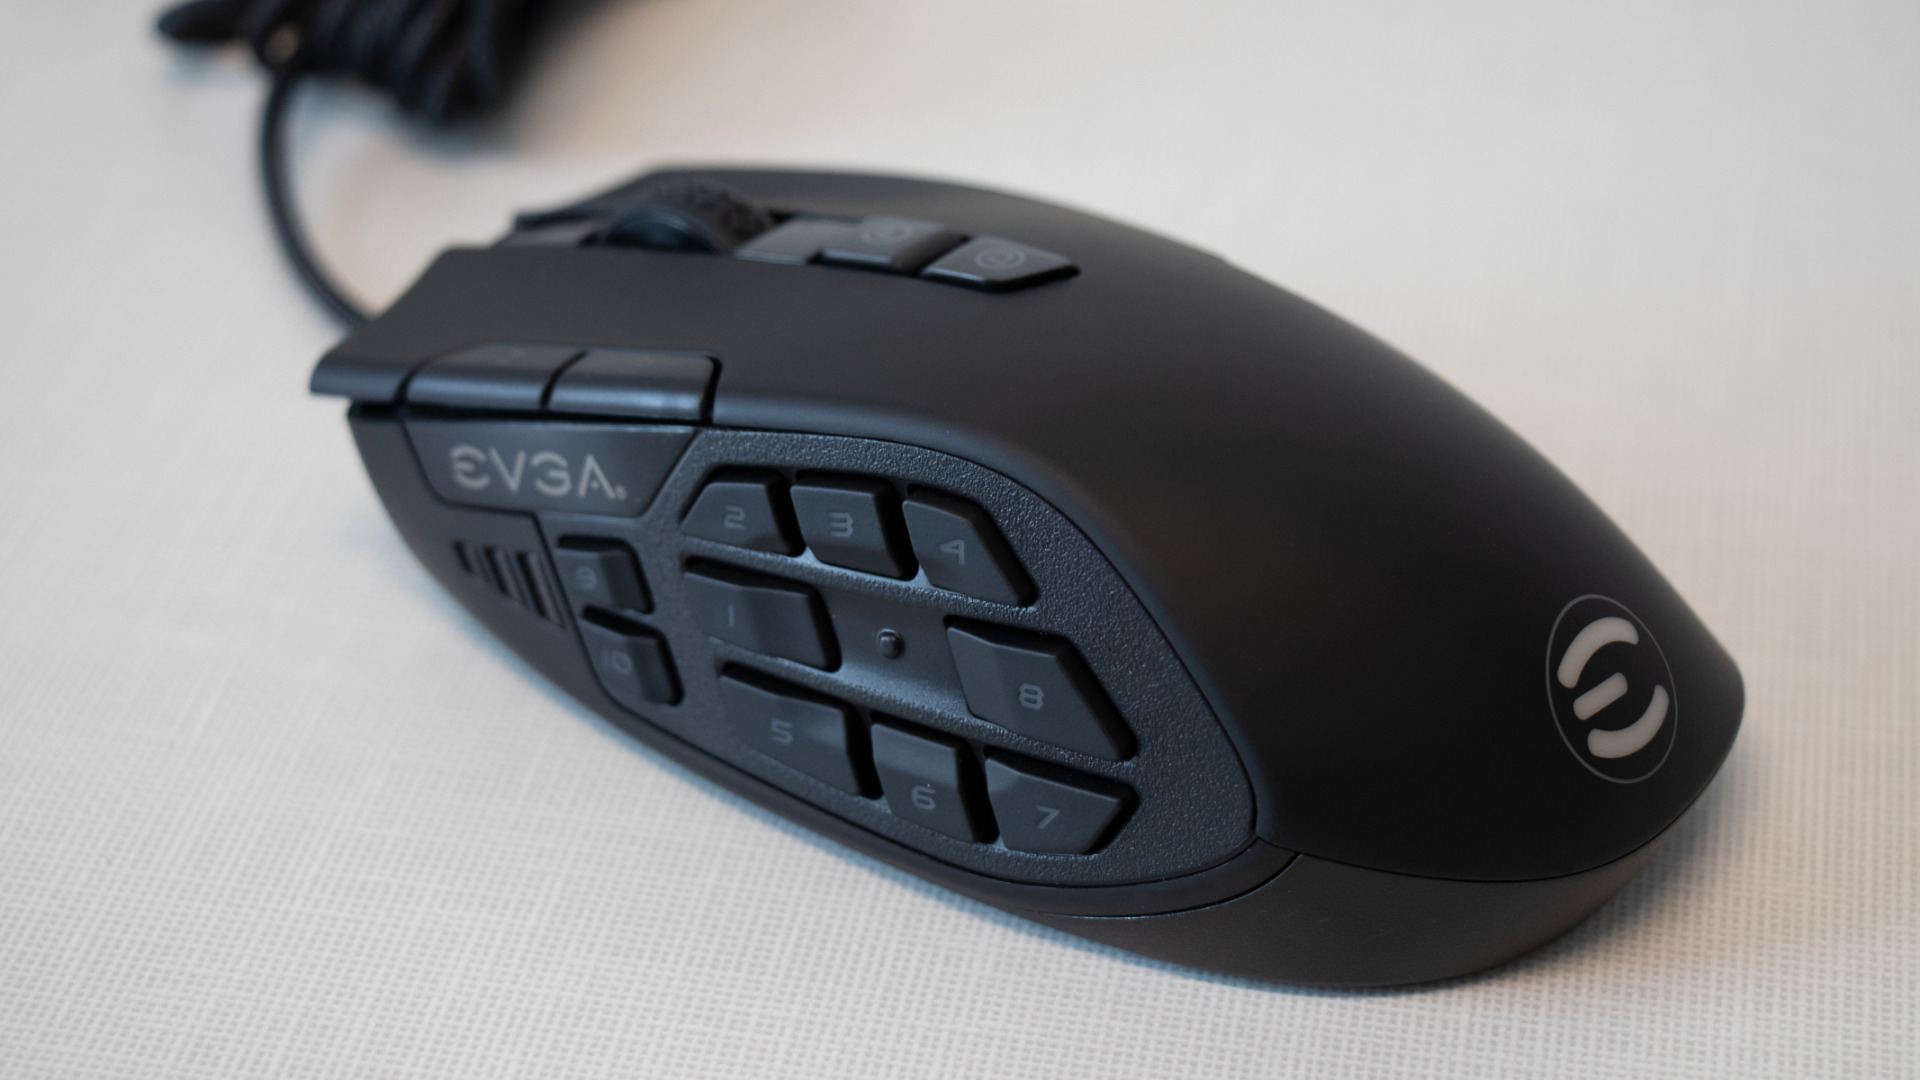 EVGA Z12 Gaming Keyboard, X20 And X15 Mice Review: Value-Priced Arsenal